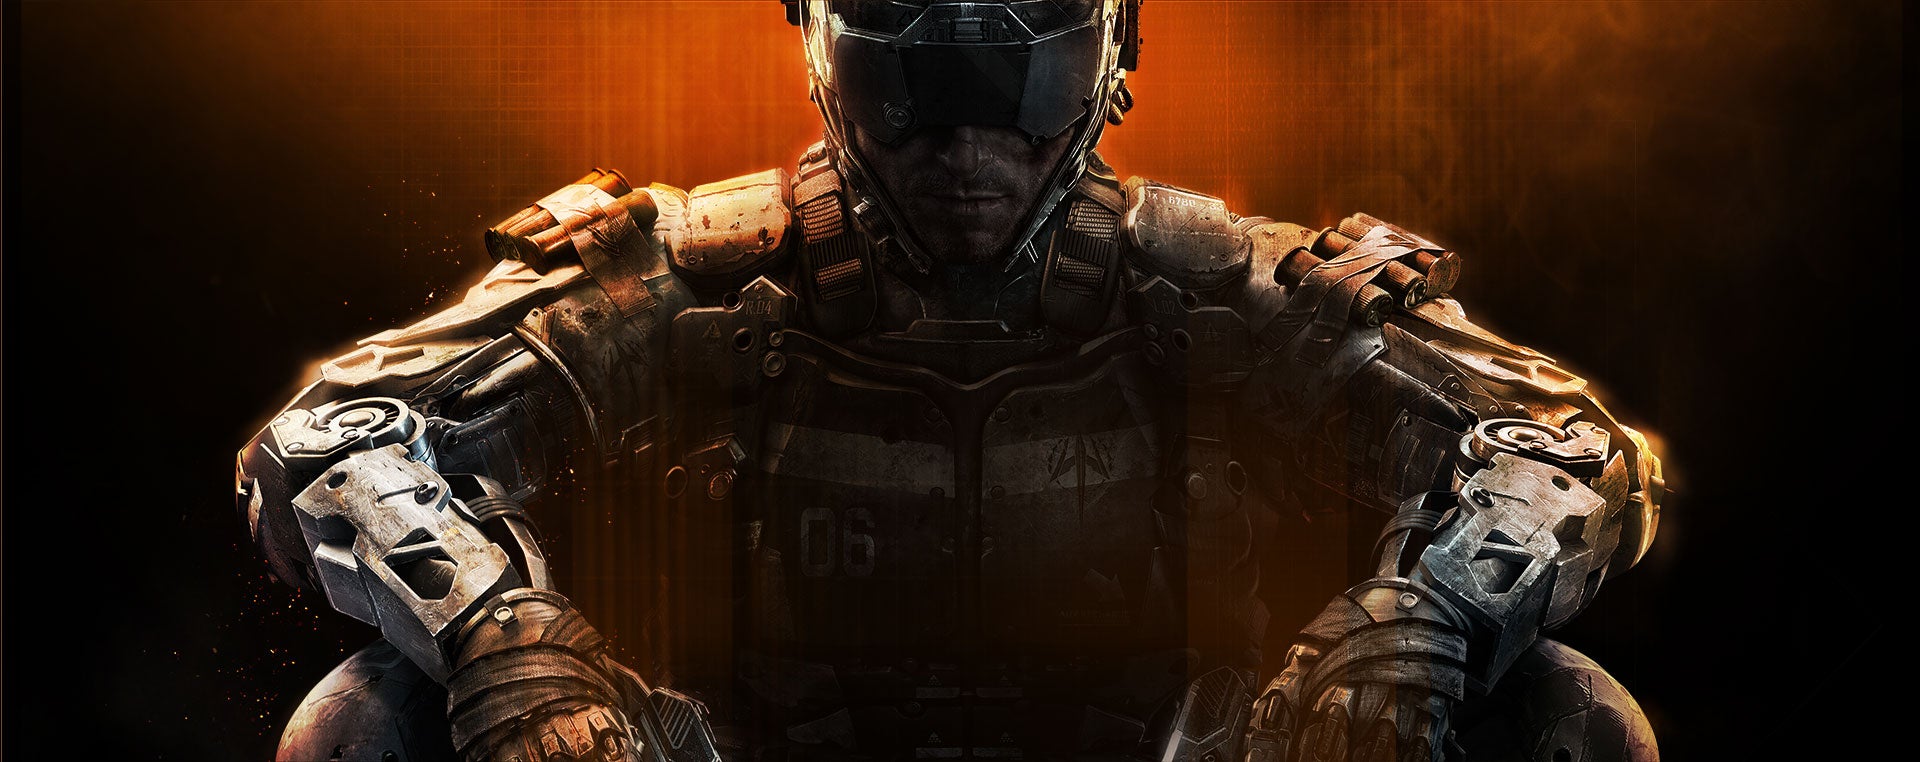 Image for Call of Duty: Black Ops 3 Awakening DLC out February, first gameplay revealed